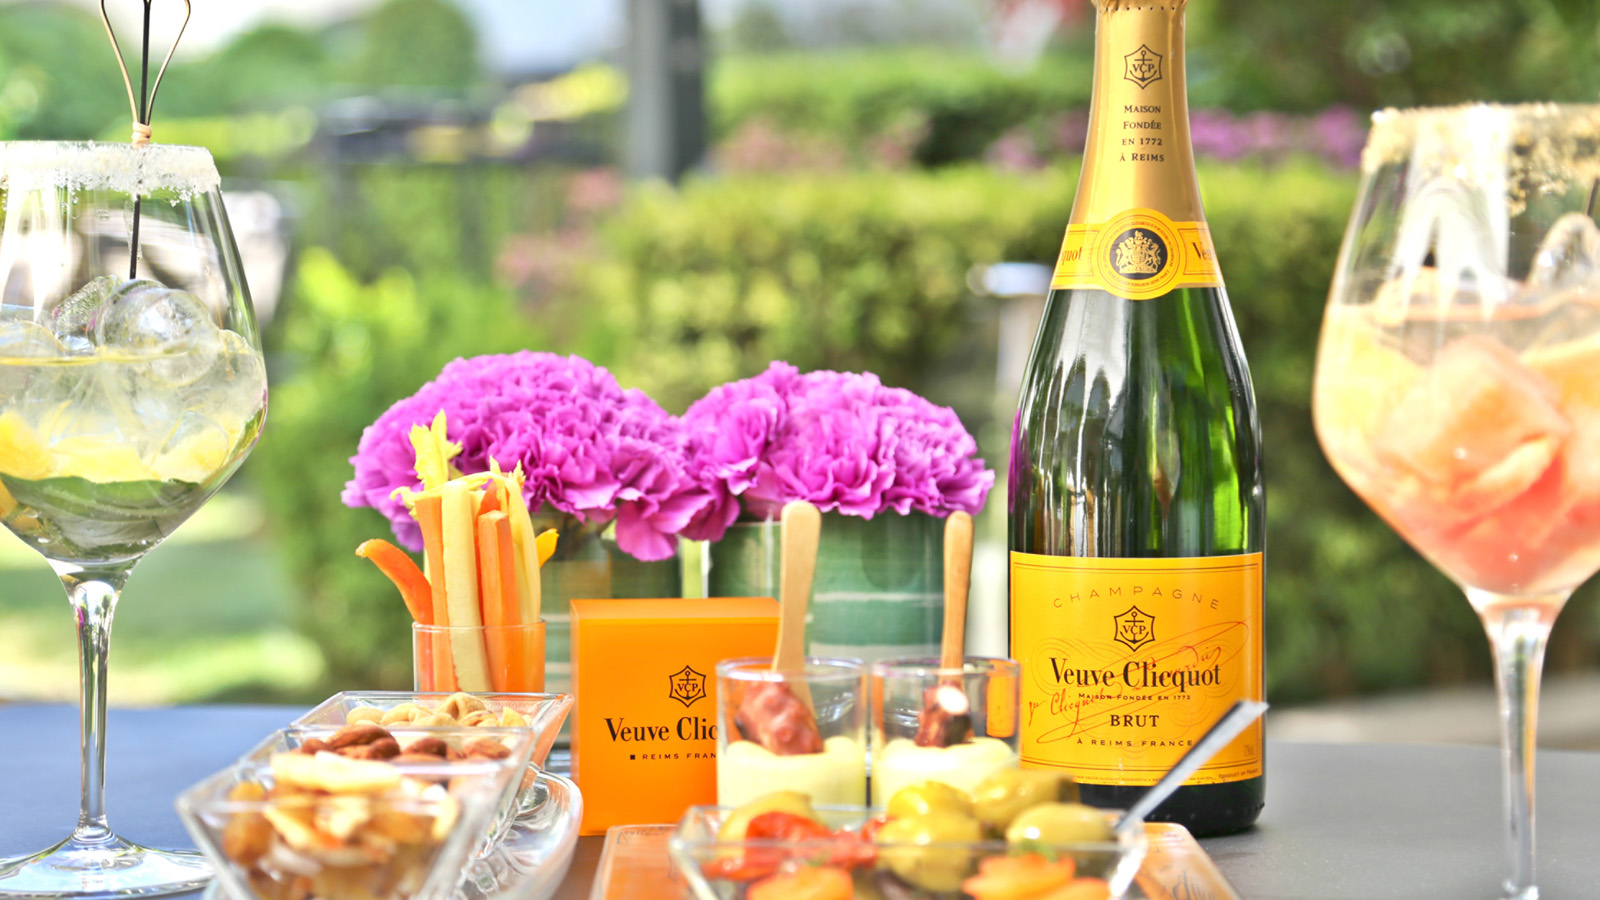 Santé! Four Seasons Resort and Club Dallas at Las Colinas Partners with Veuve Clicquot for Club Clicquot